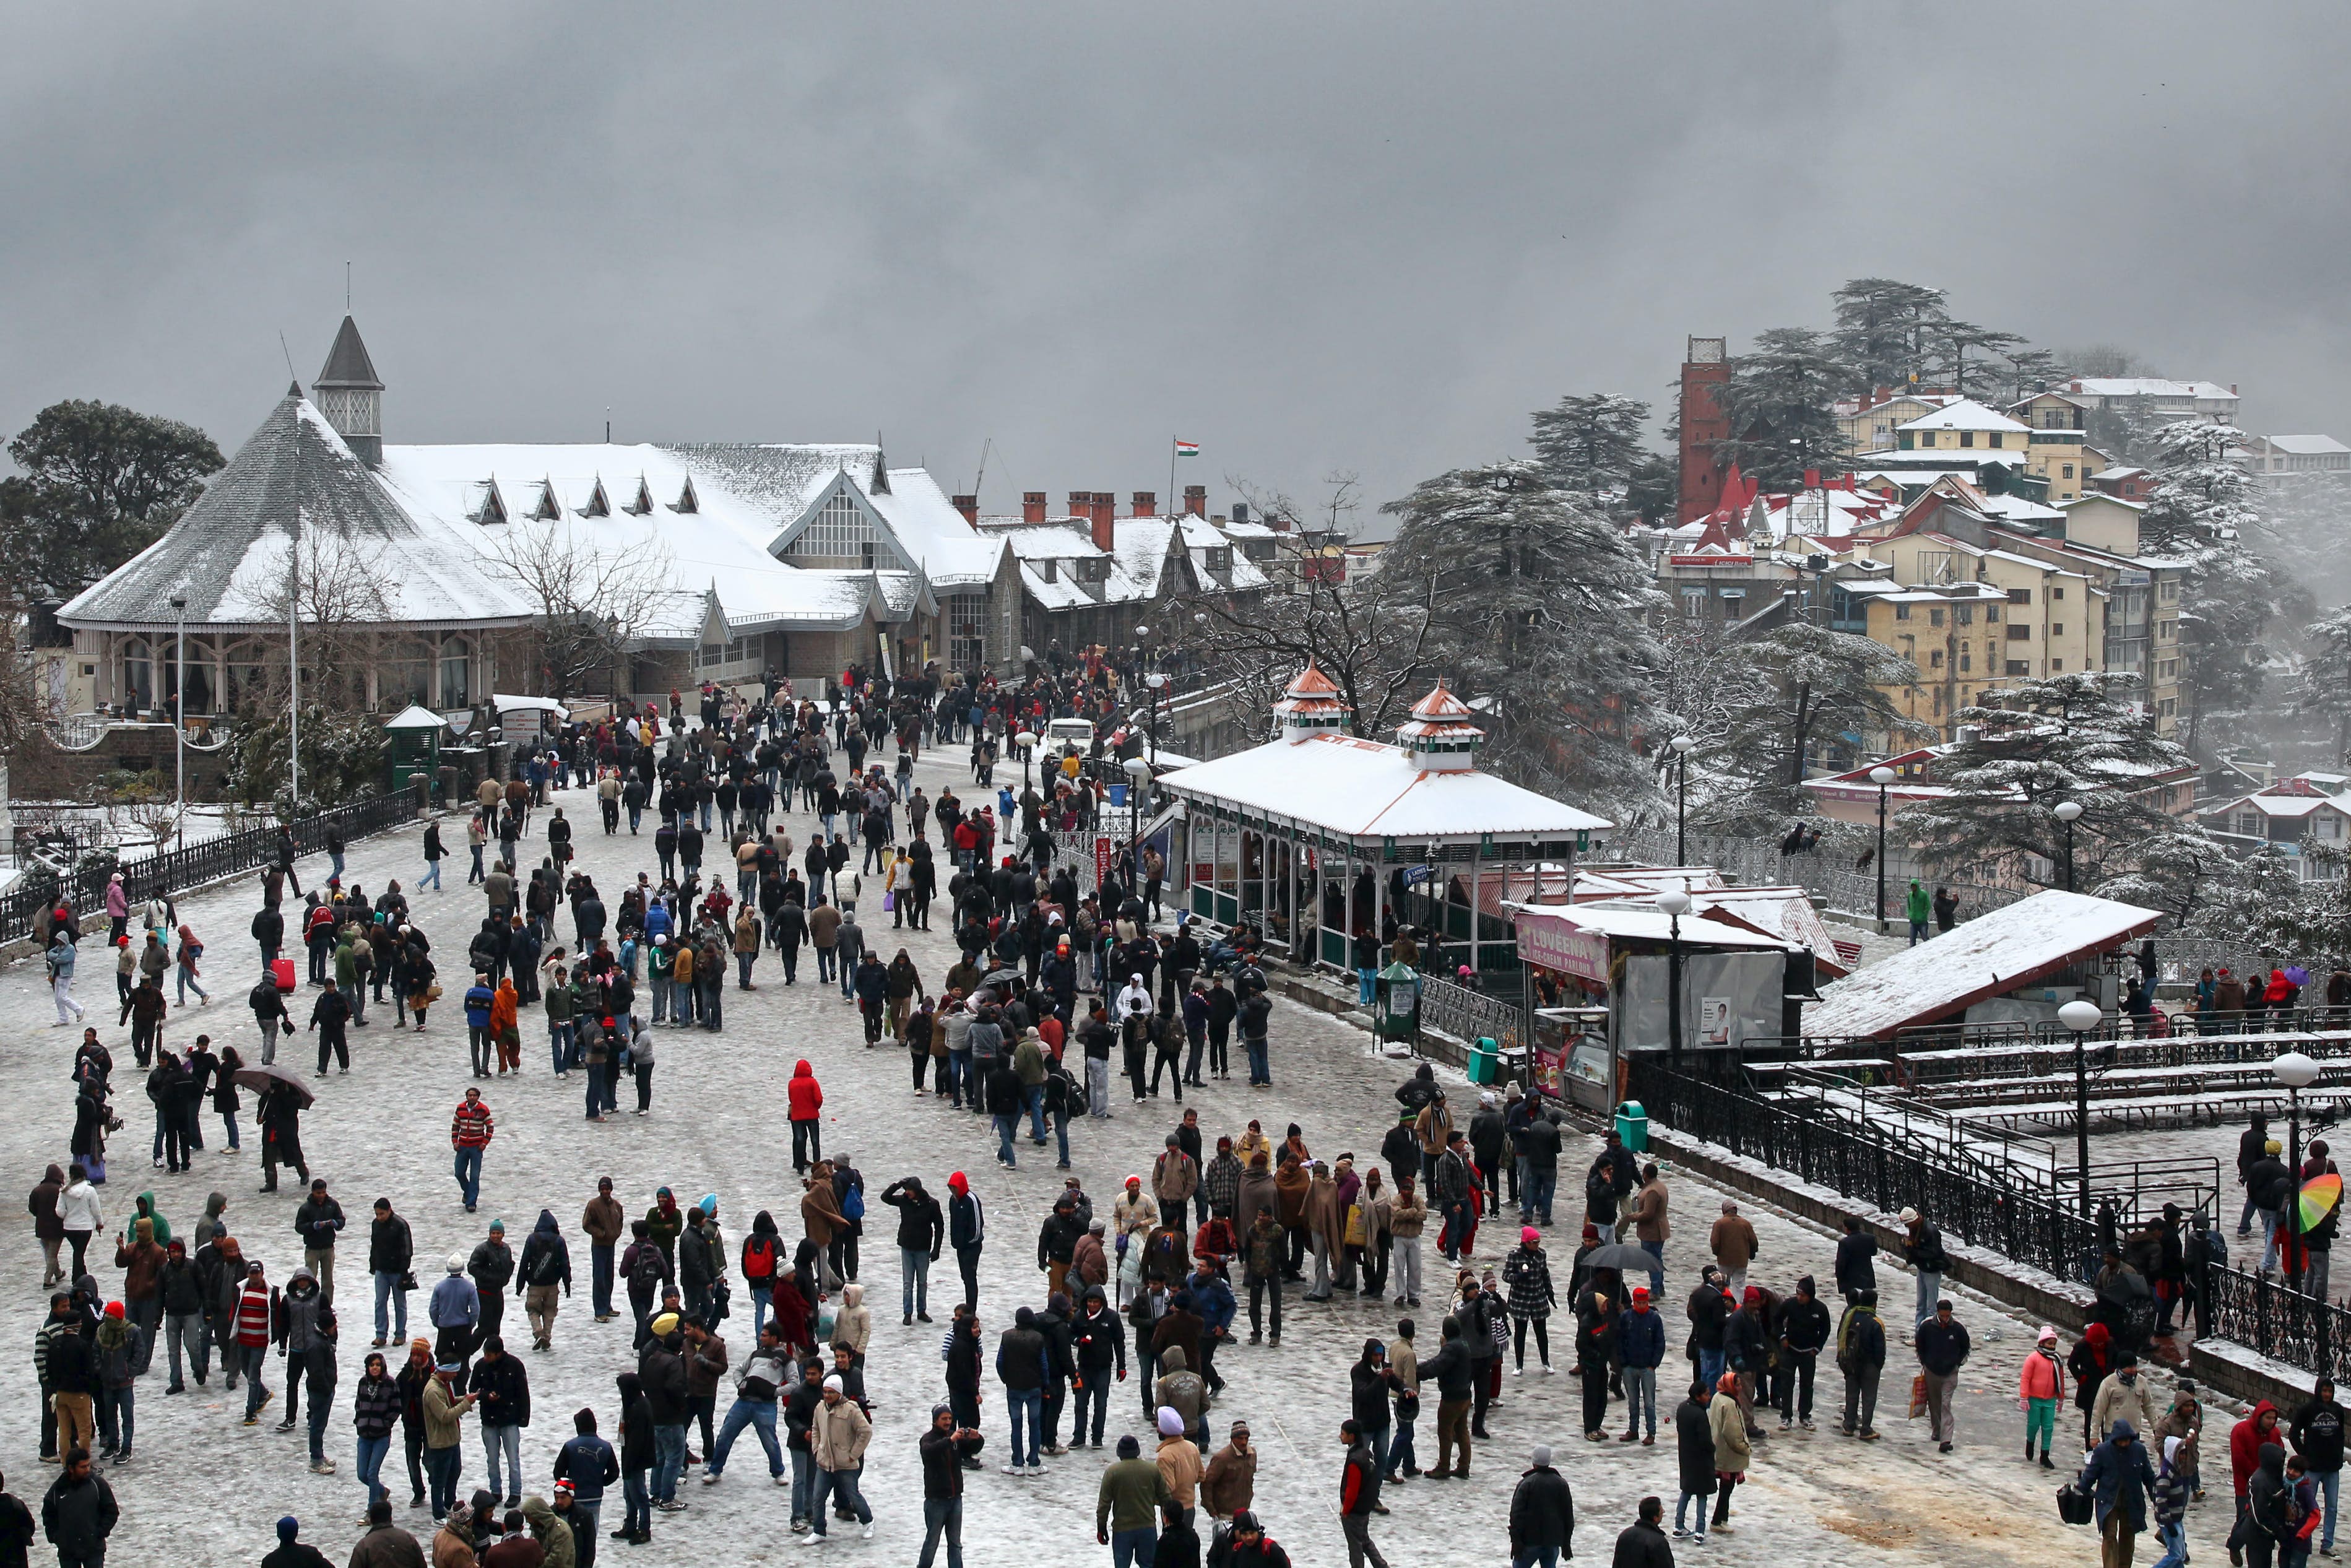 Shimla bags the first spot in India’s SDG list